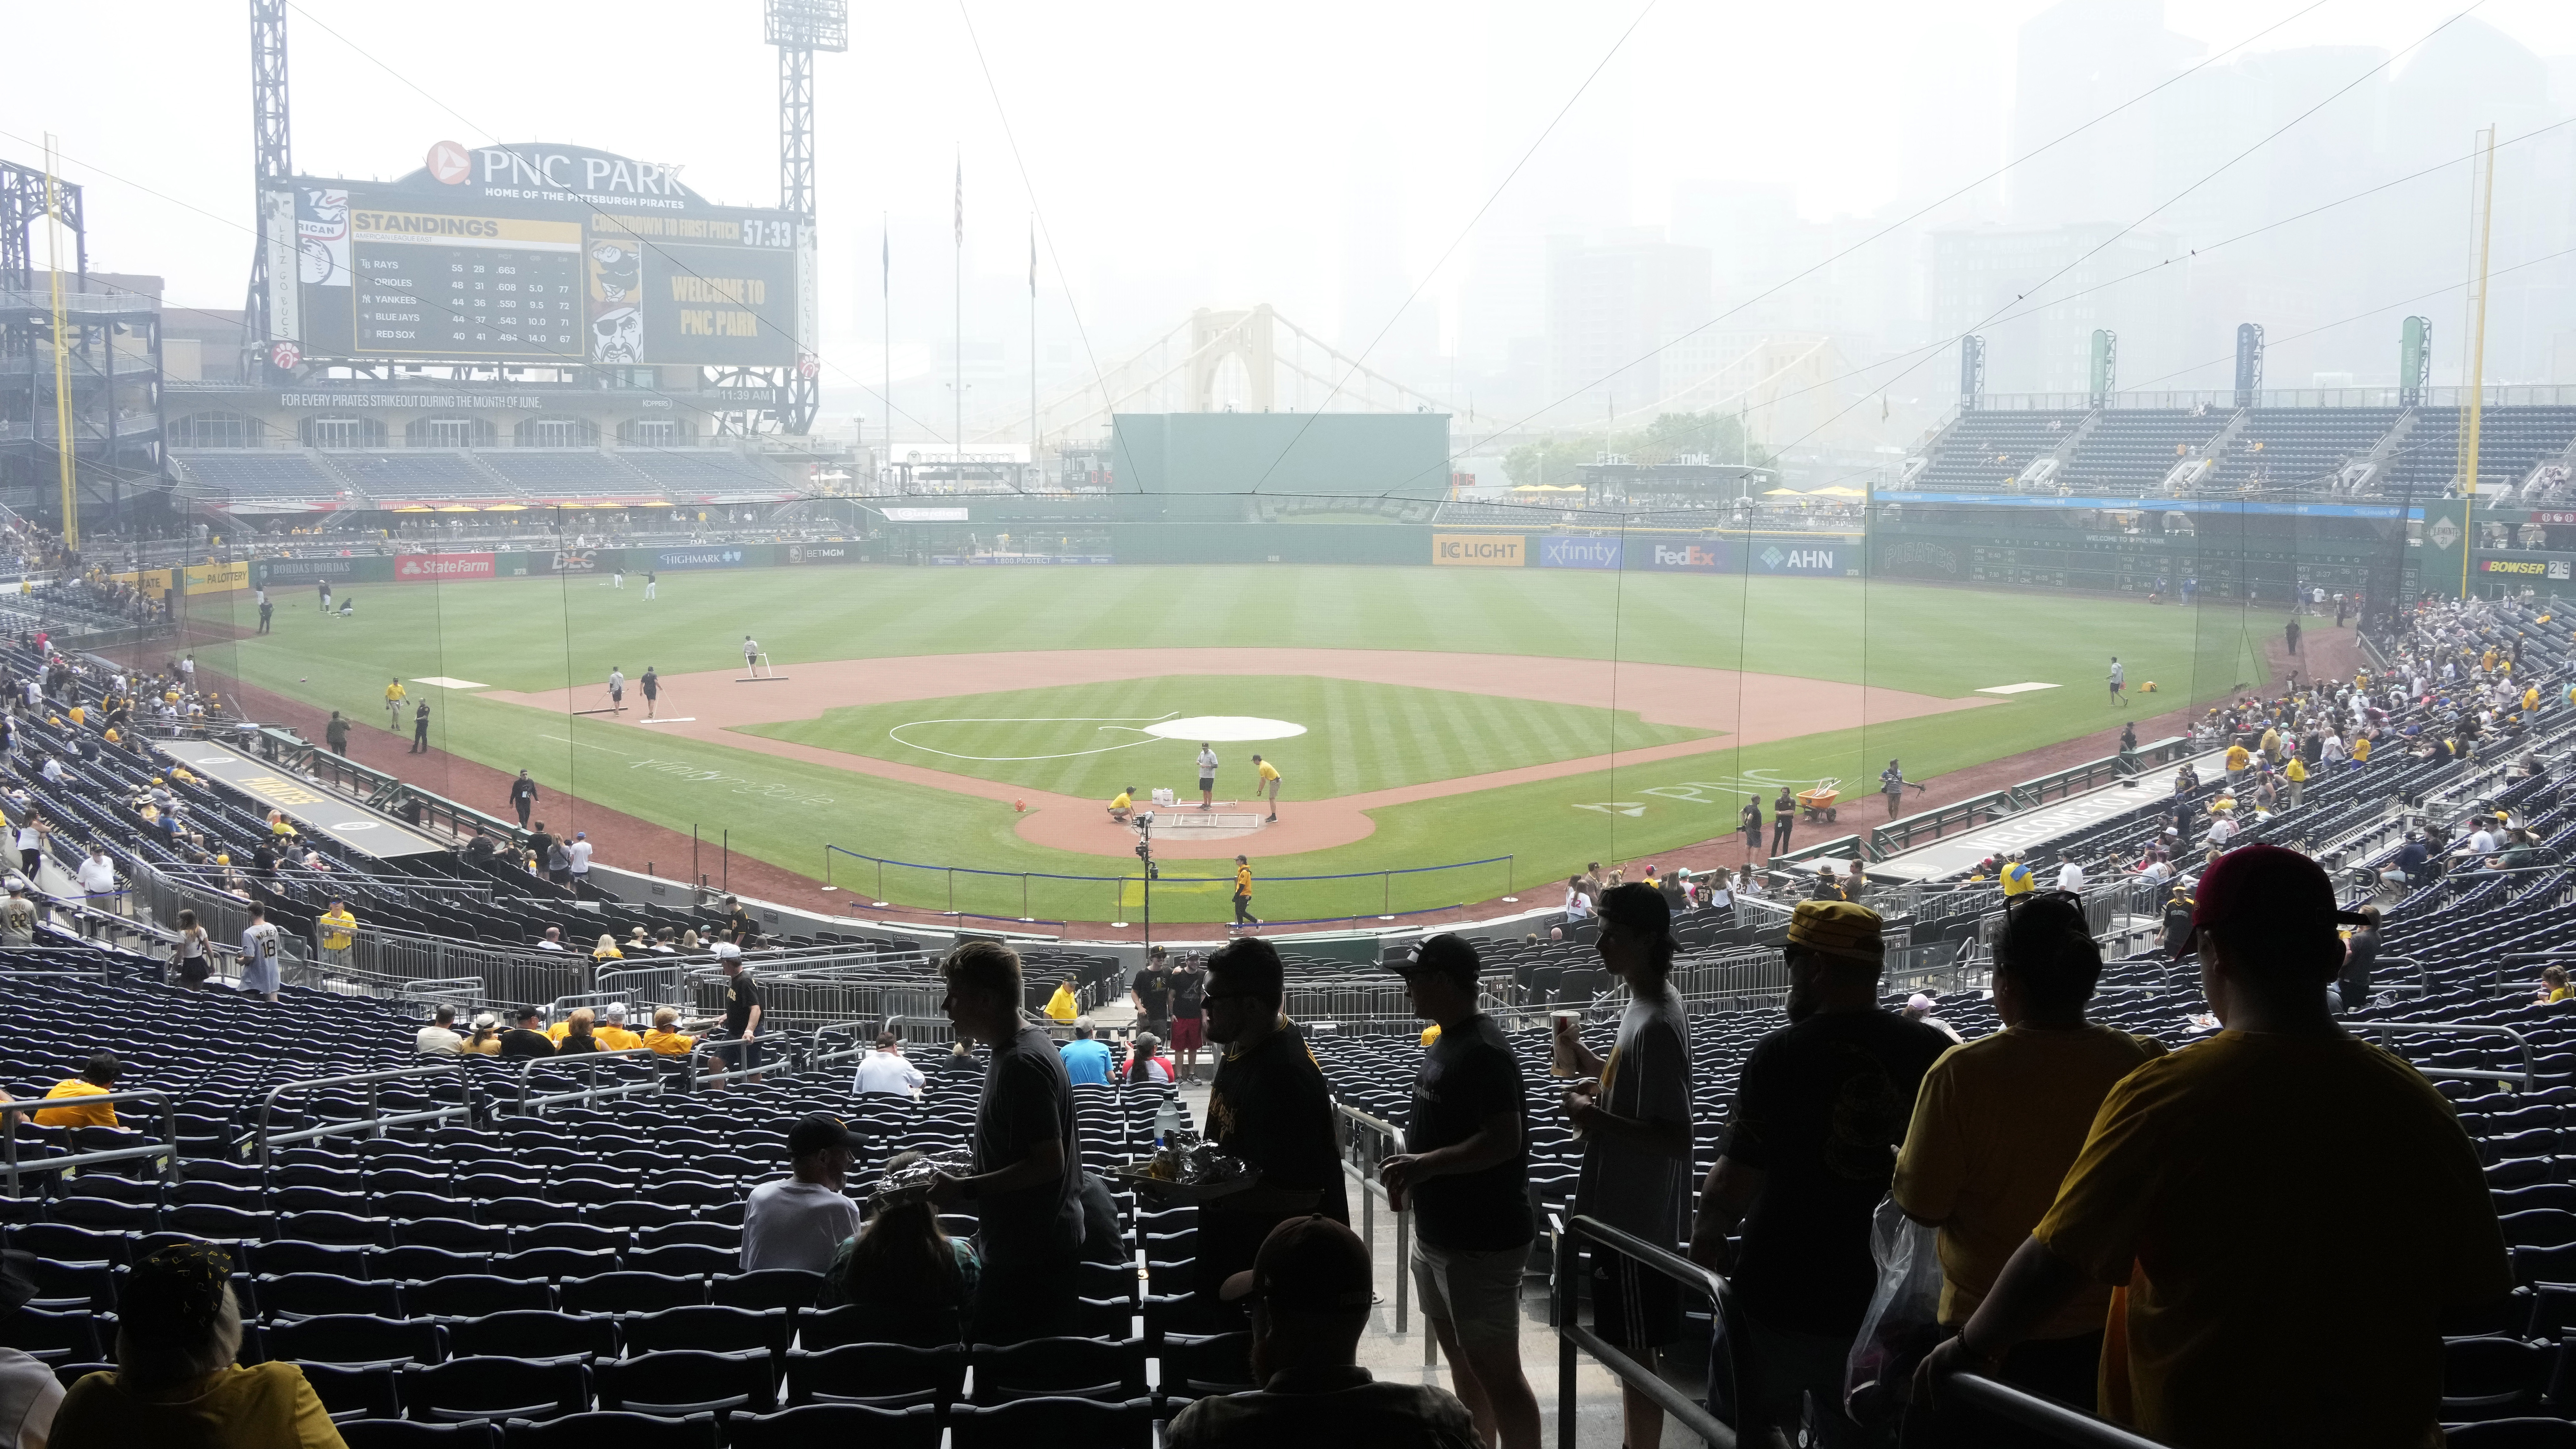 Pirates announce several renovations to PNC Park